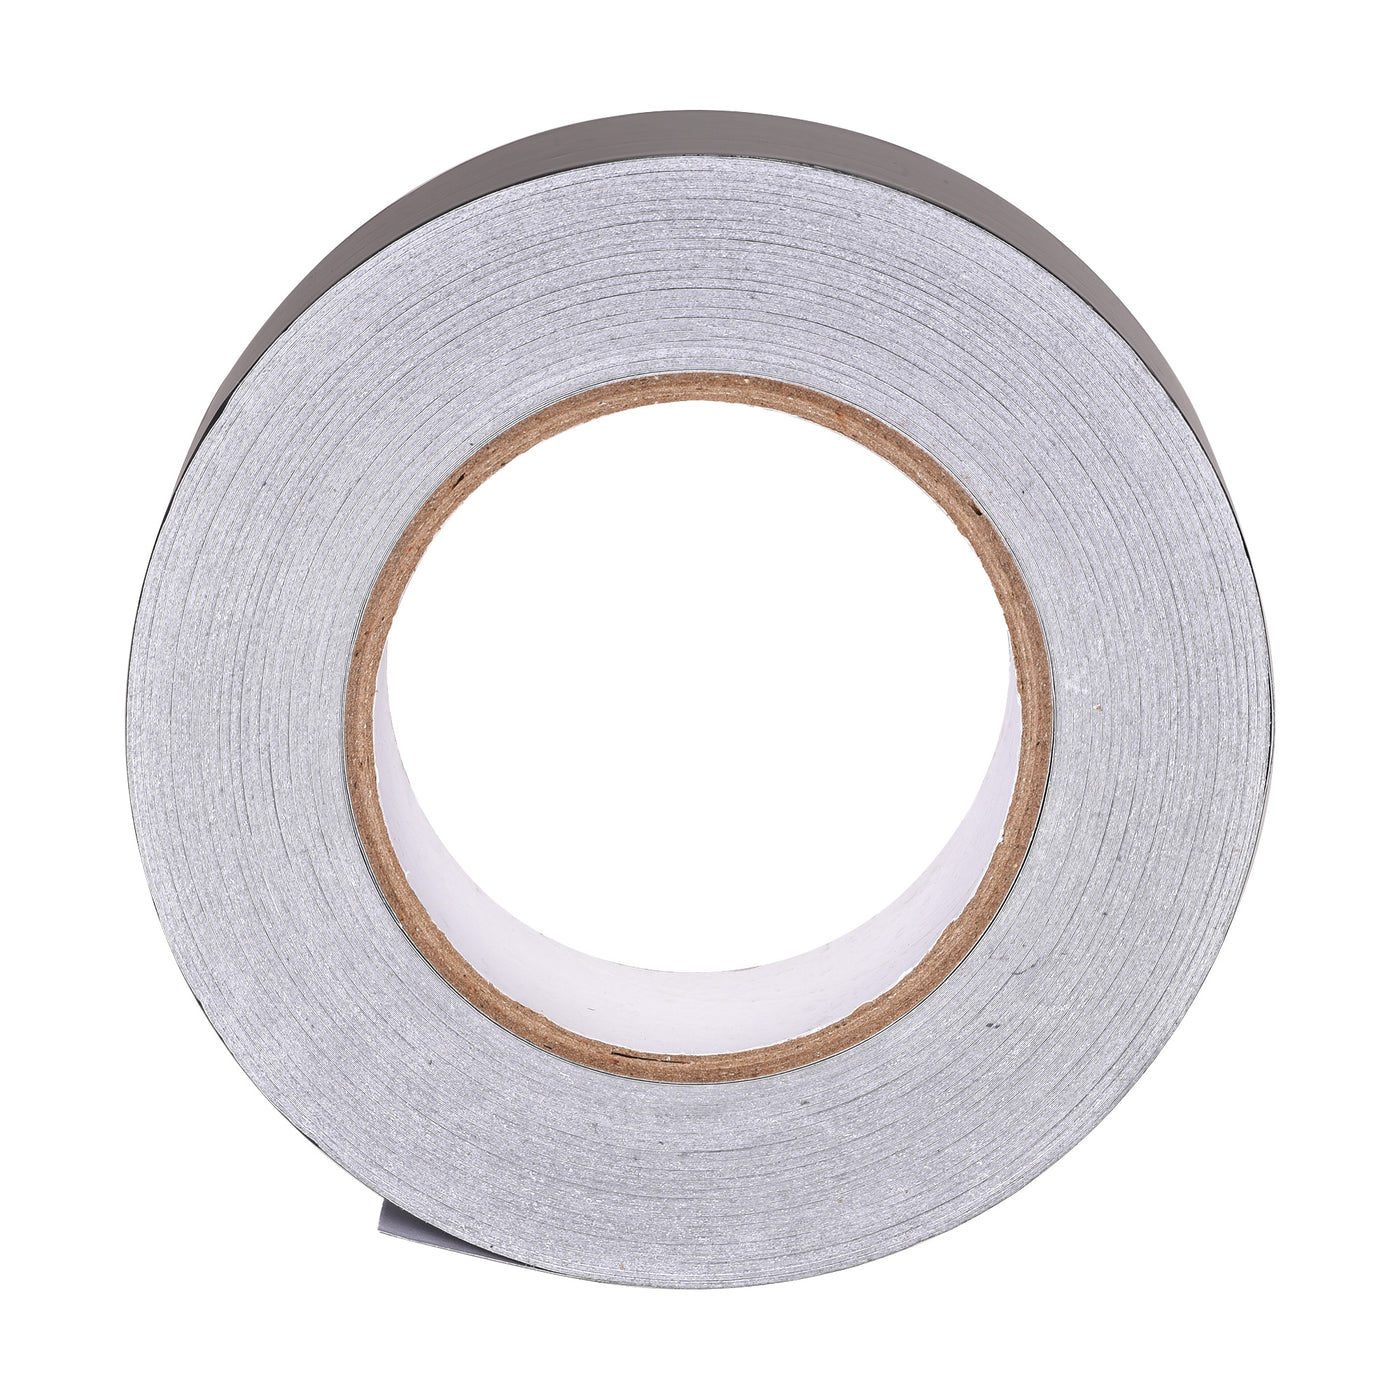 uxcell Uxcell 55mm Aluminum Foil Tape for HVAC, Patching Hot and Blocking light 50m/164ft